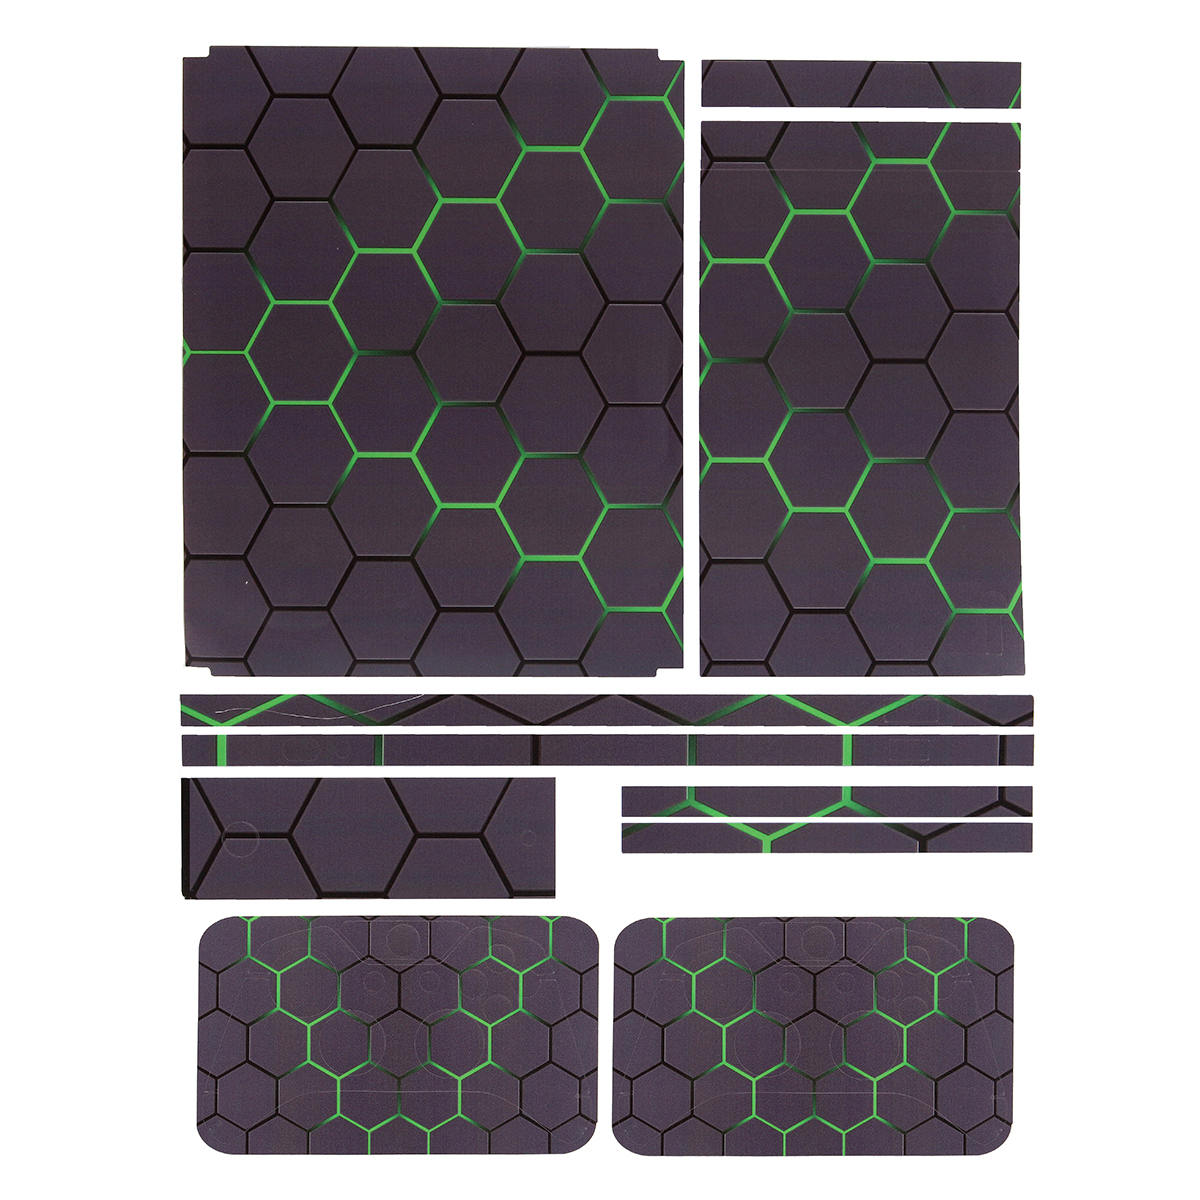 Green Grid Vinyl Decal Skin Stickers Cover for Xbox One S Game Console&2 Controllers 42